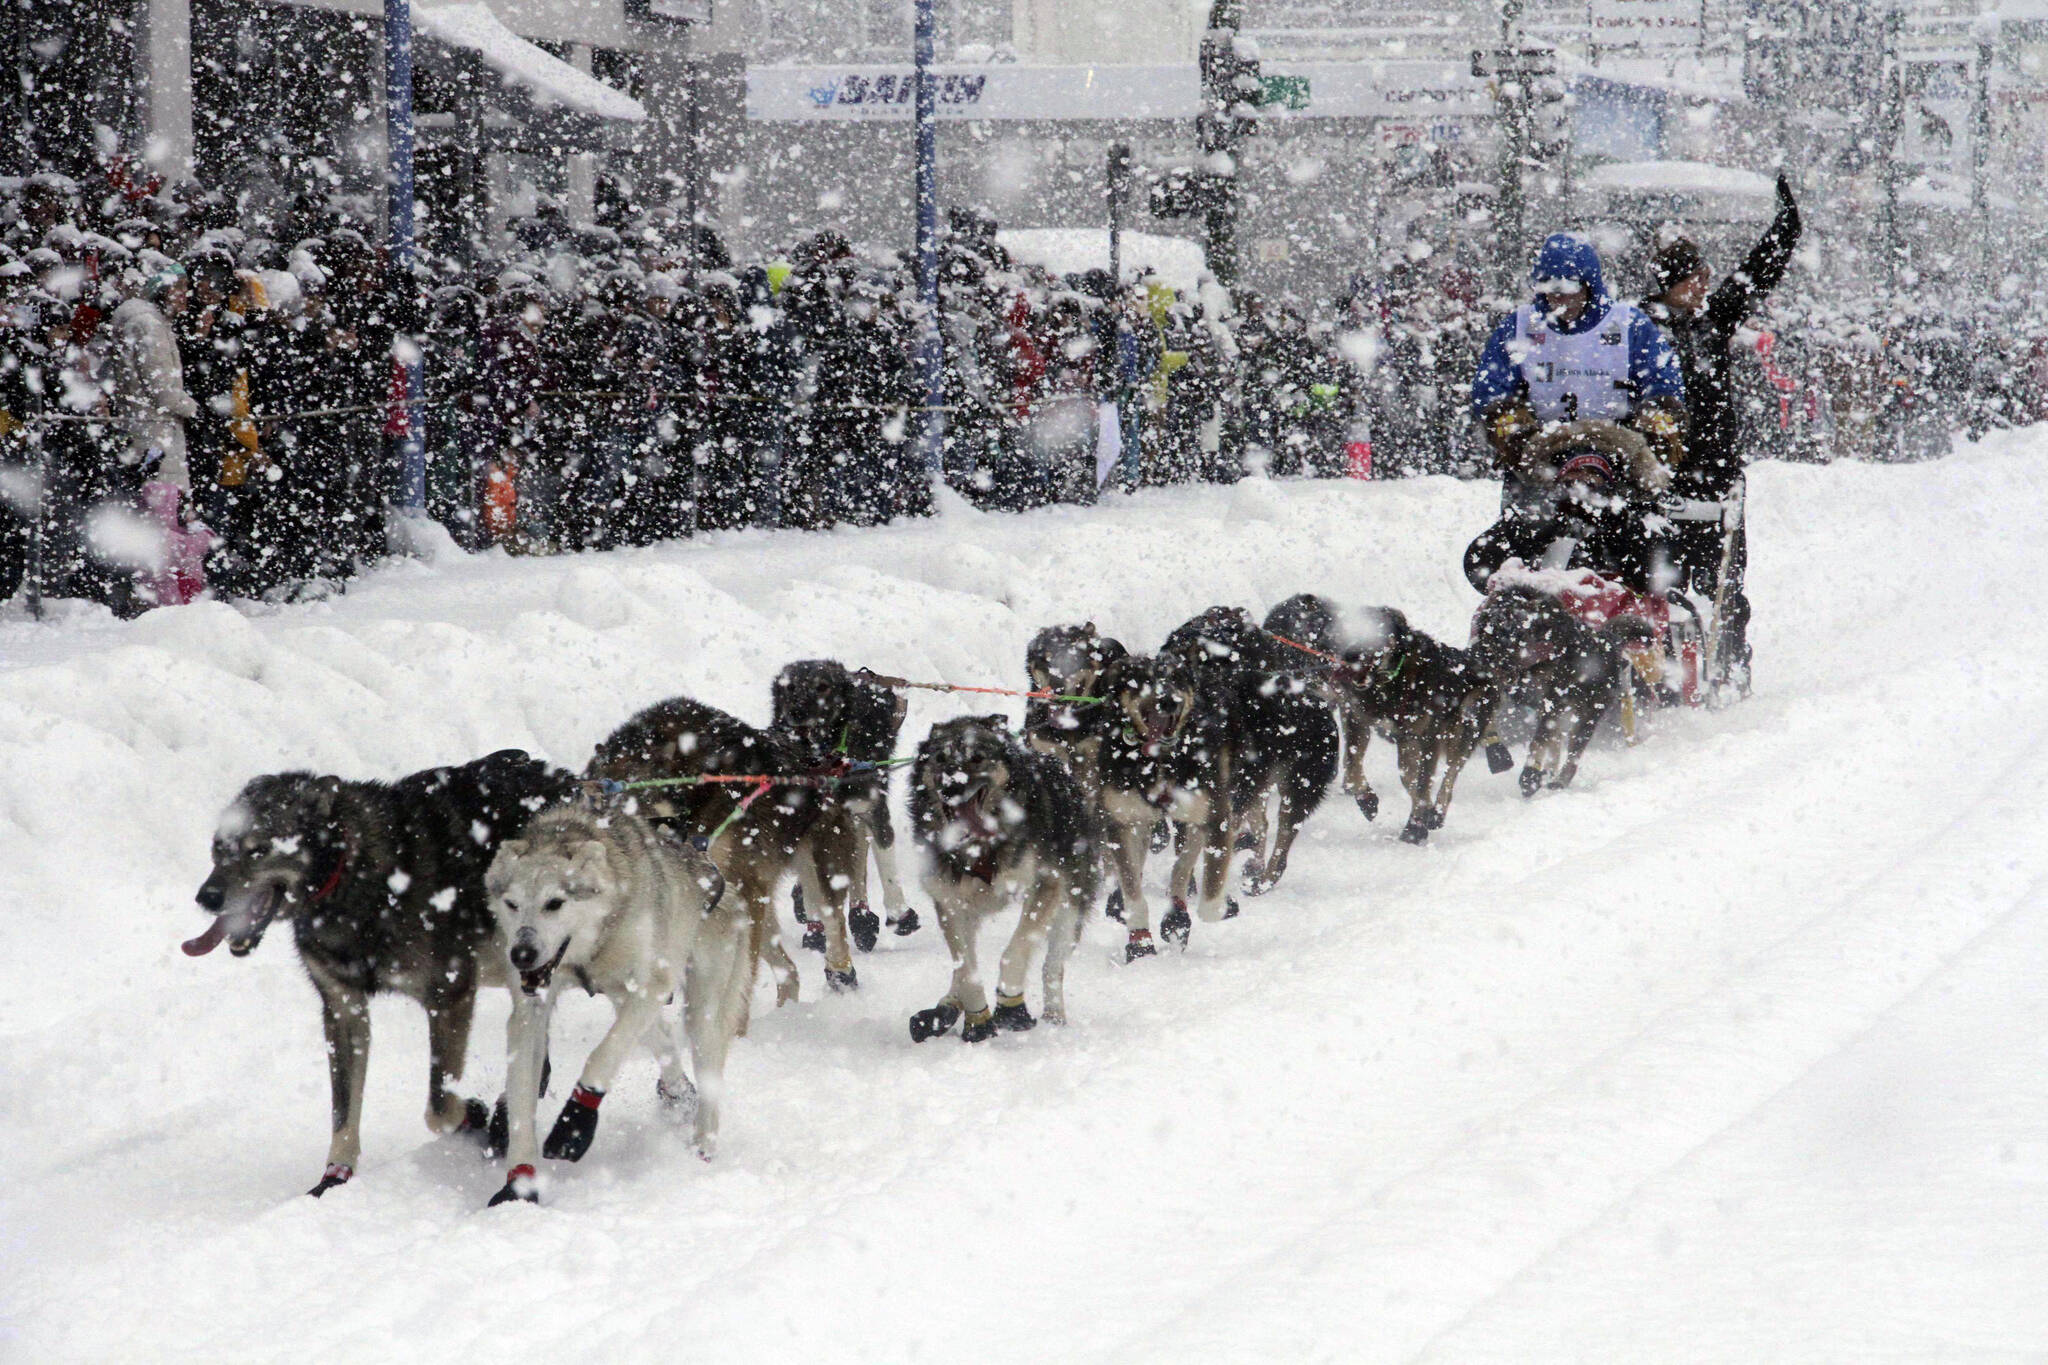 Four-time winner Jeff King takes his sled dog team through a snowstorm in downtown Anchorage, Alaska, on Saturday, March 4, 2022, during the ceremonial start of the Iditarod Trail Sled Dog Race. (AP Photo/Mark Thiessen)